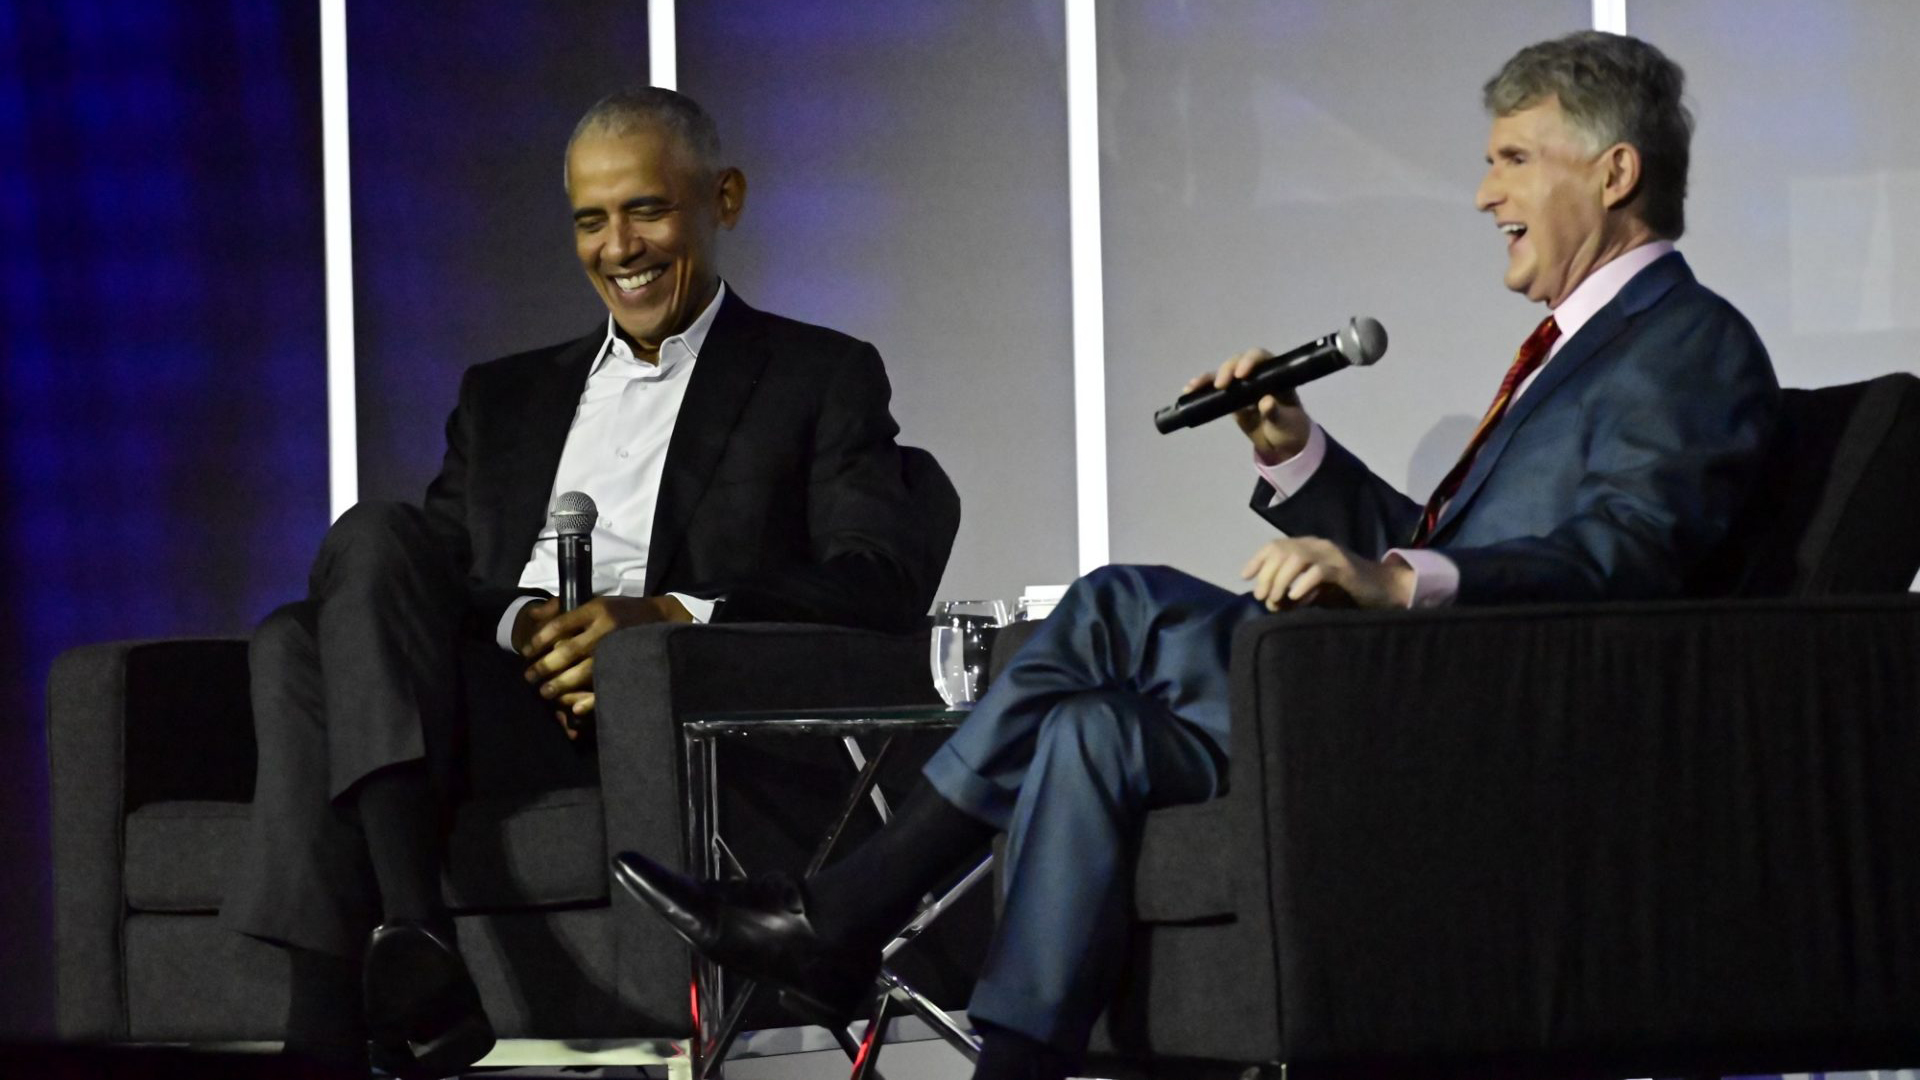 President Barack Obama participated in a fireside chat with Kresge CEO & President Rip Rapson as part of the foundation’s centennial celebration on June 11, 2024, in Detroit.